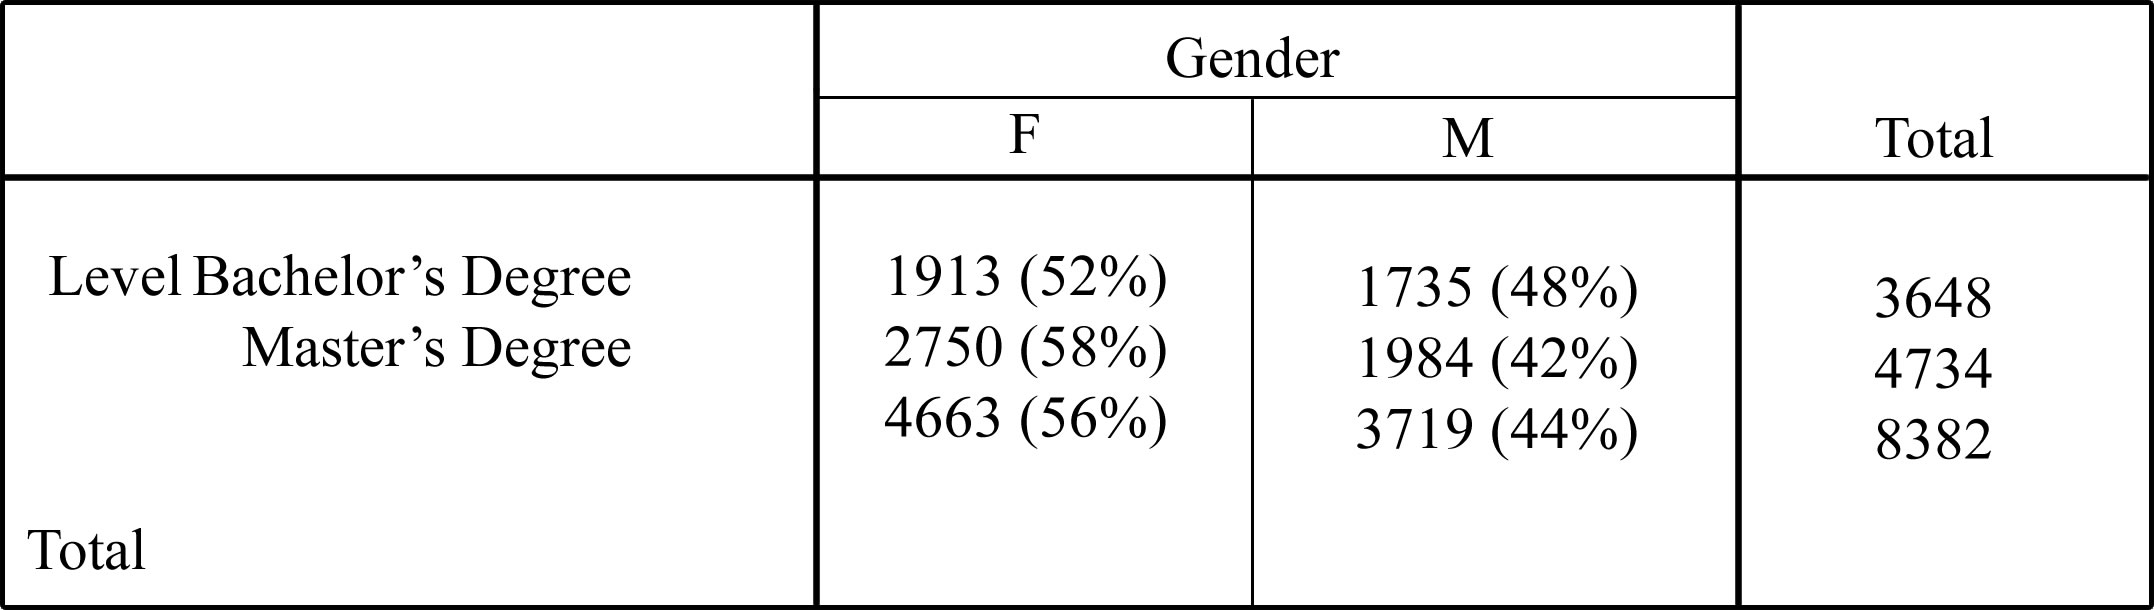 Table 1. Gender by Degree Level.